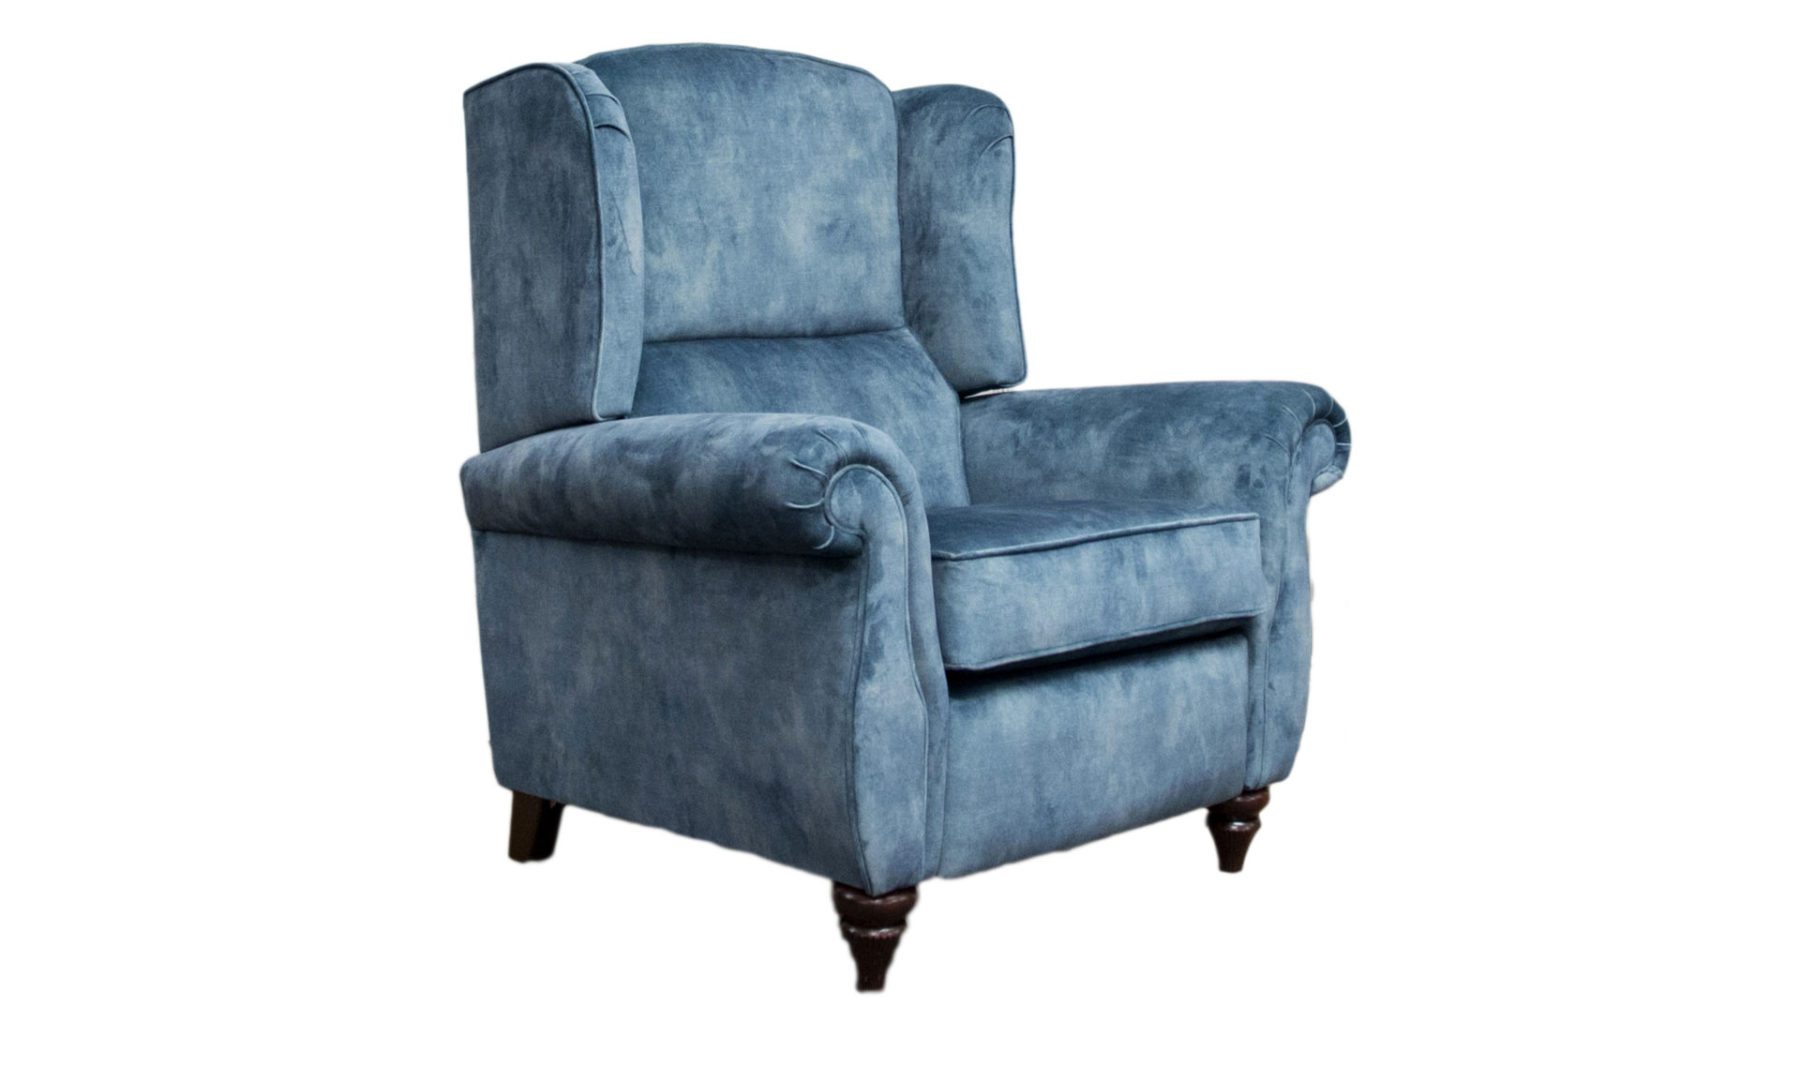 Greville Recliner Chair in Lovely Ocean, Gold Collection Fabric